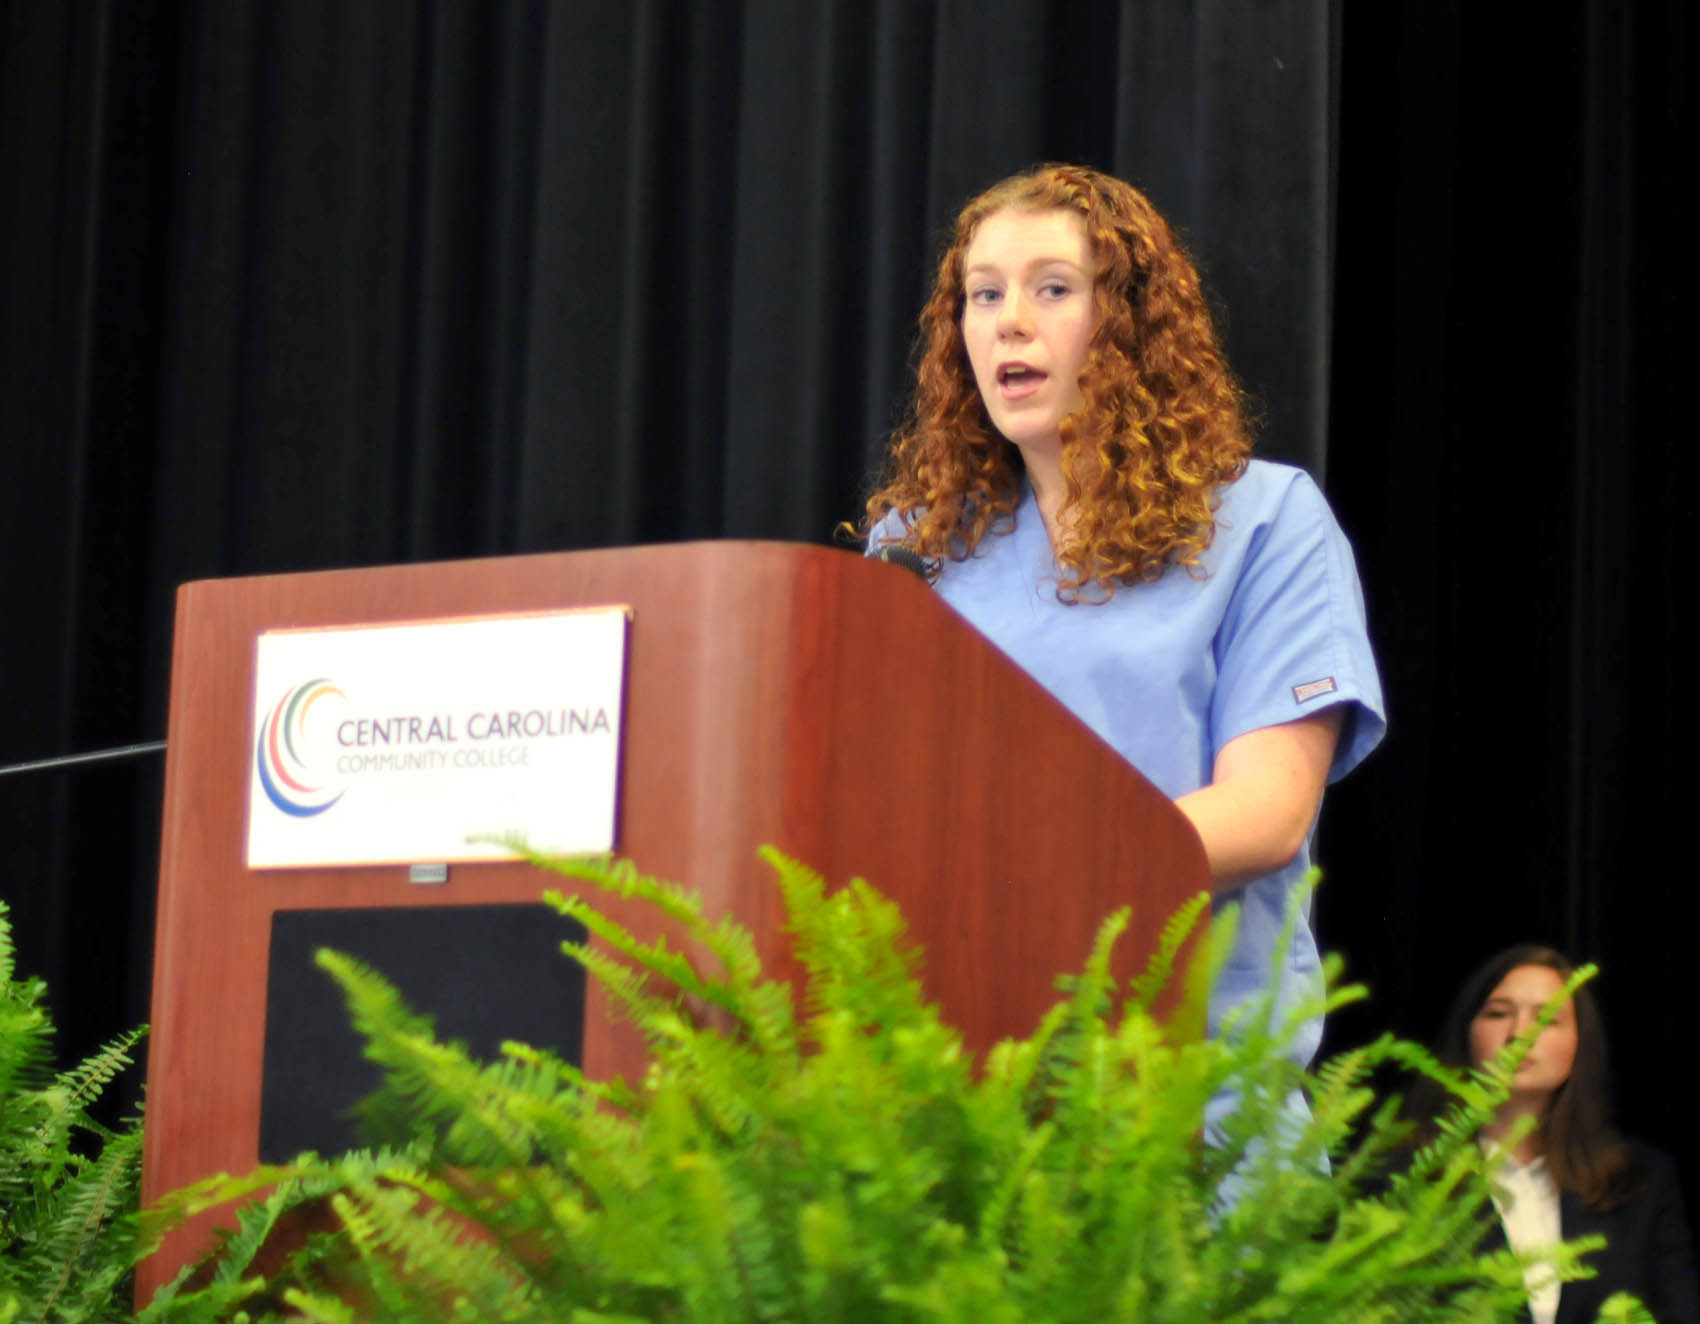 Click to enlarge,  Briana Peterman, of Lee County, was one of four student speakers at the Central Carolina Community College Continuing Education medical programs graduation. The event was held May 26 at the Dennis A. Wicker Civic Center in Sanford. For more information about Continuing Education medical programs, call Lennie Stephenson, CCCC's Director of Continuing Education medical programs, at 910-814-8833 or email lstephenson@cccc.edu. 